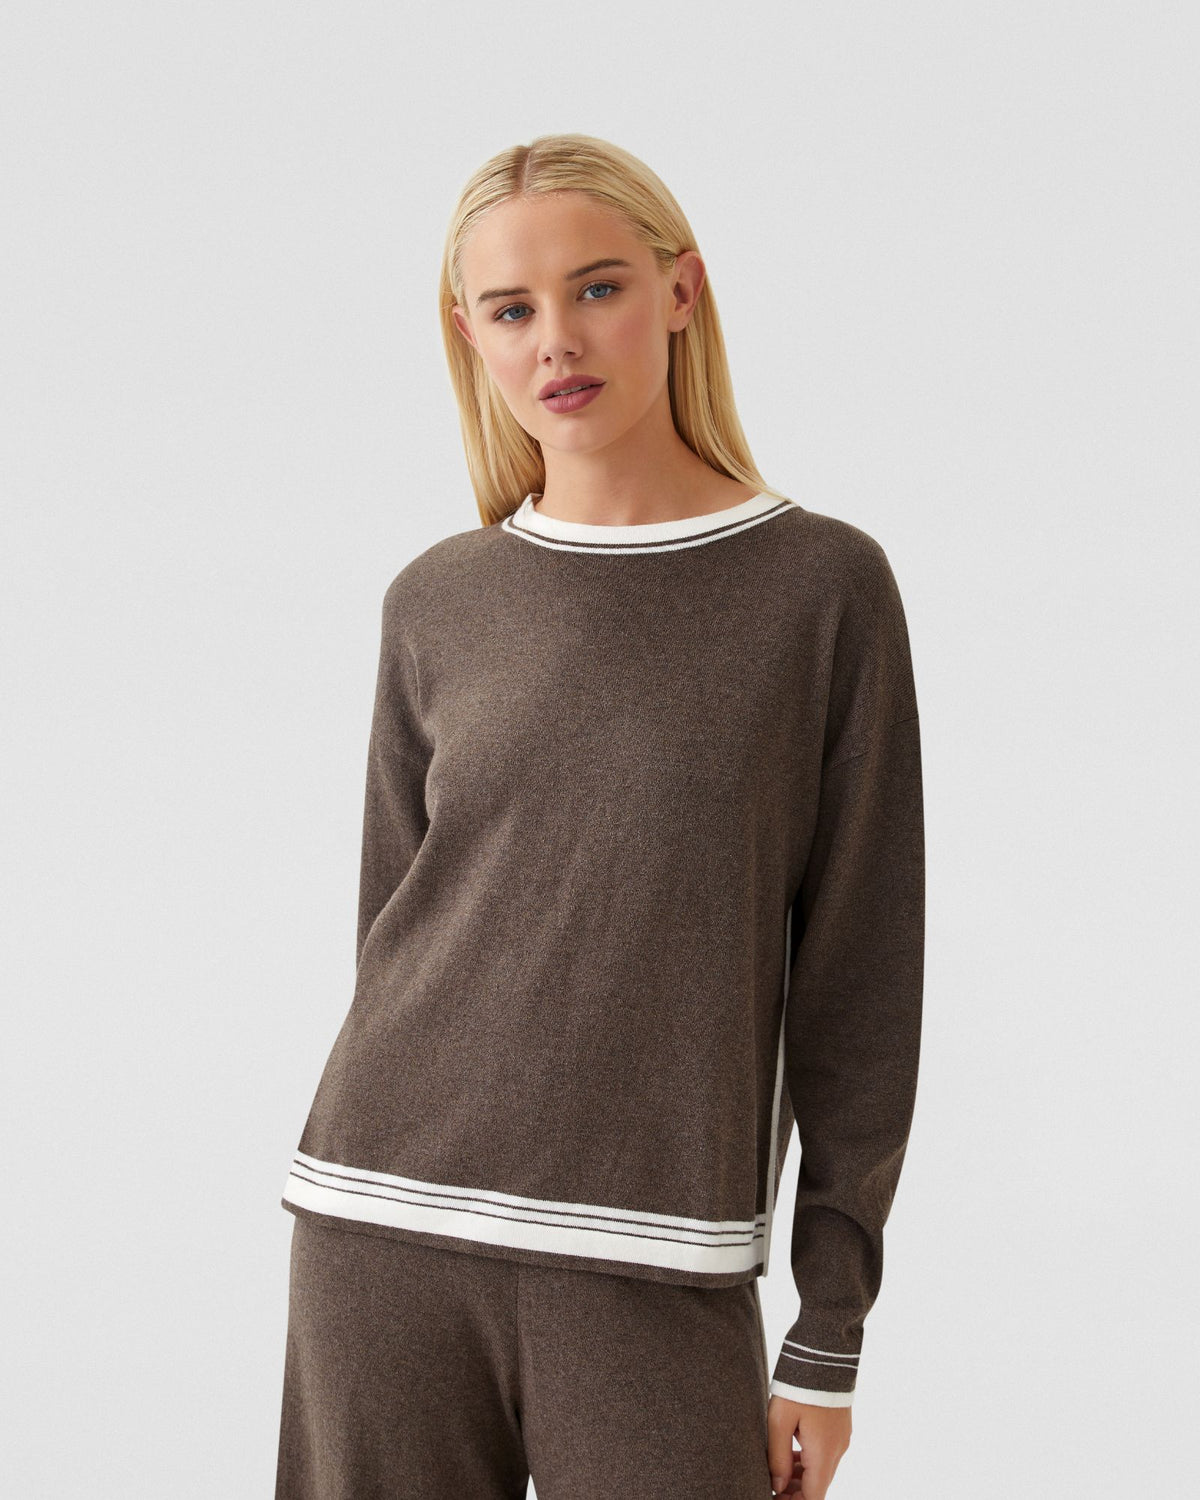 ANNALISE CREW NECK KNIT - AVAILABLE ~ 1-2 weeks WOMENS KNITWEAR